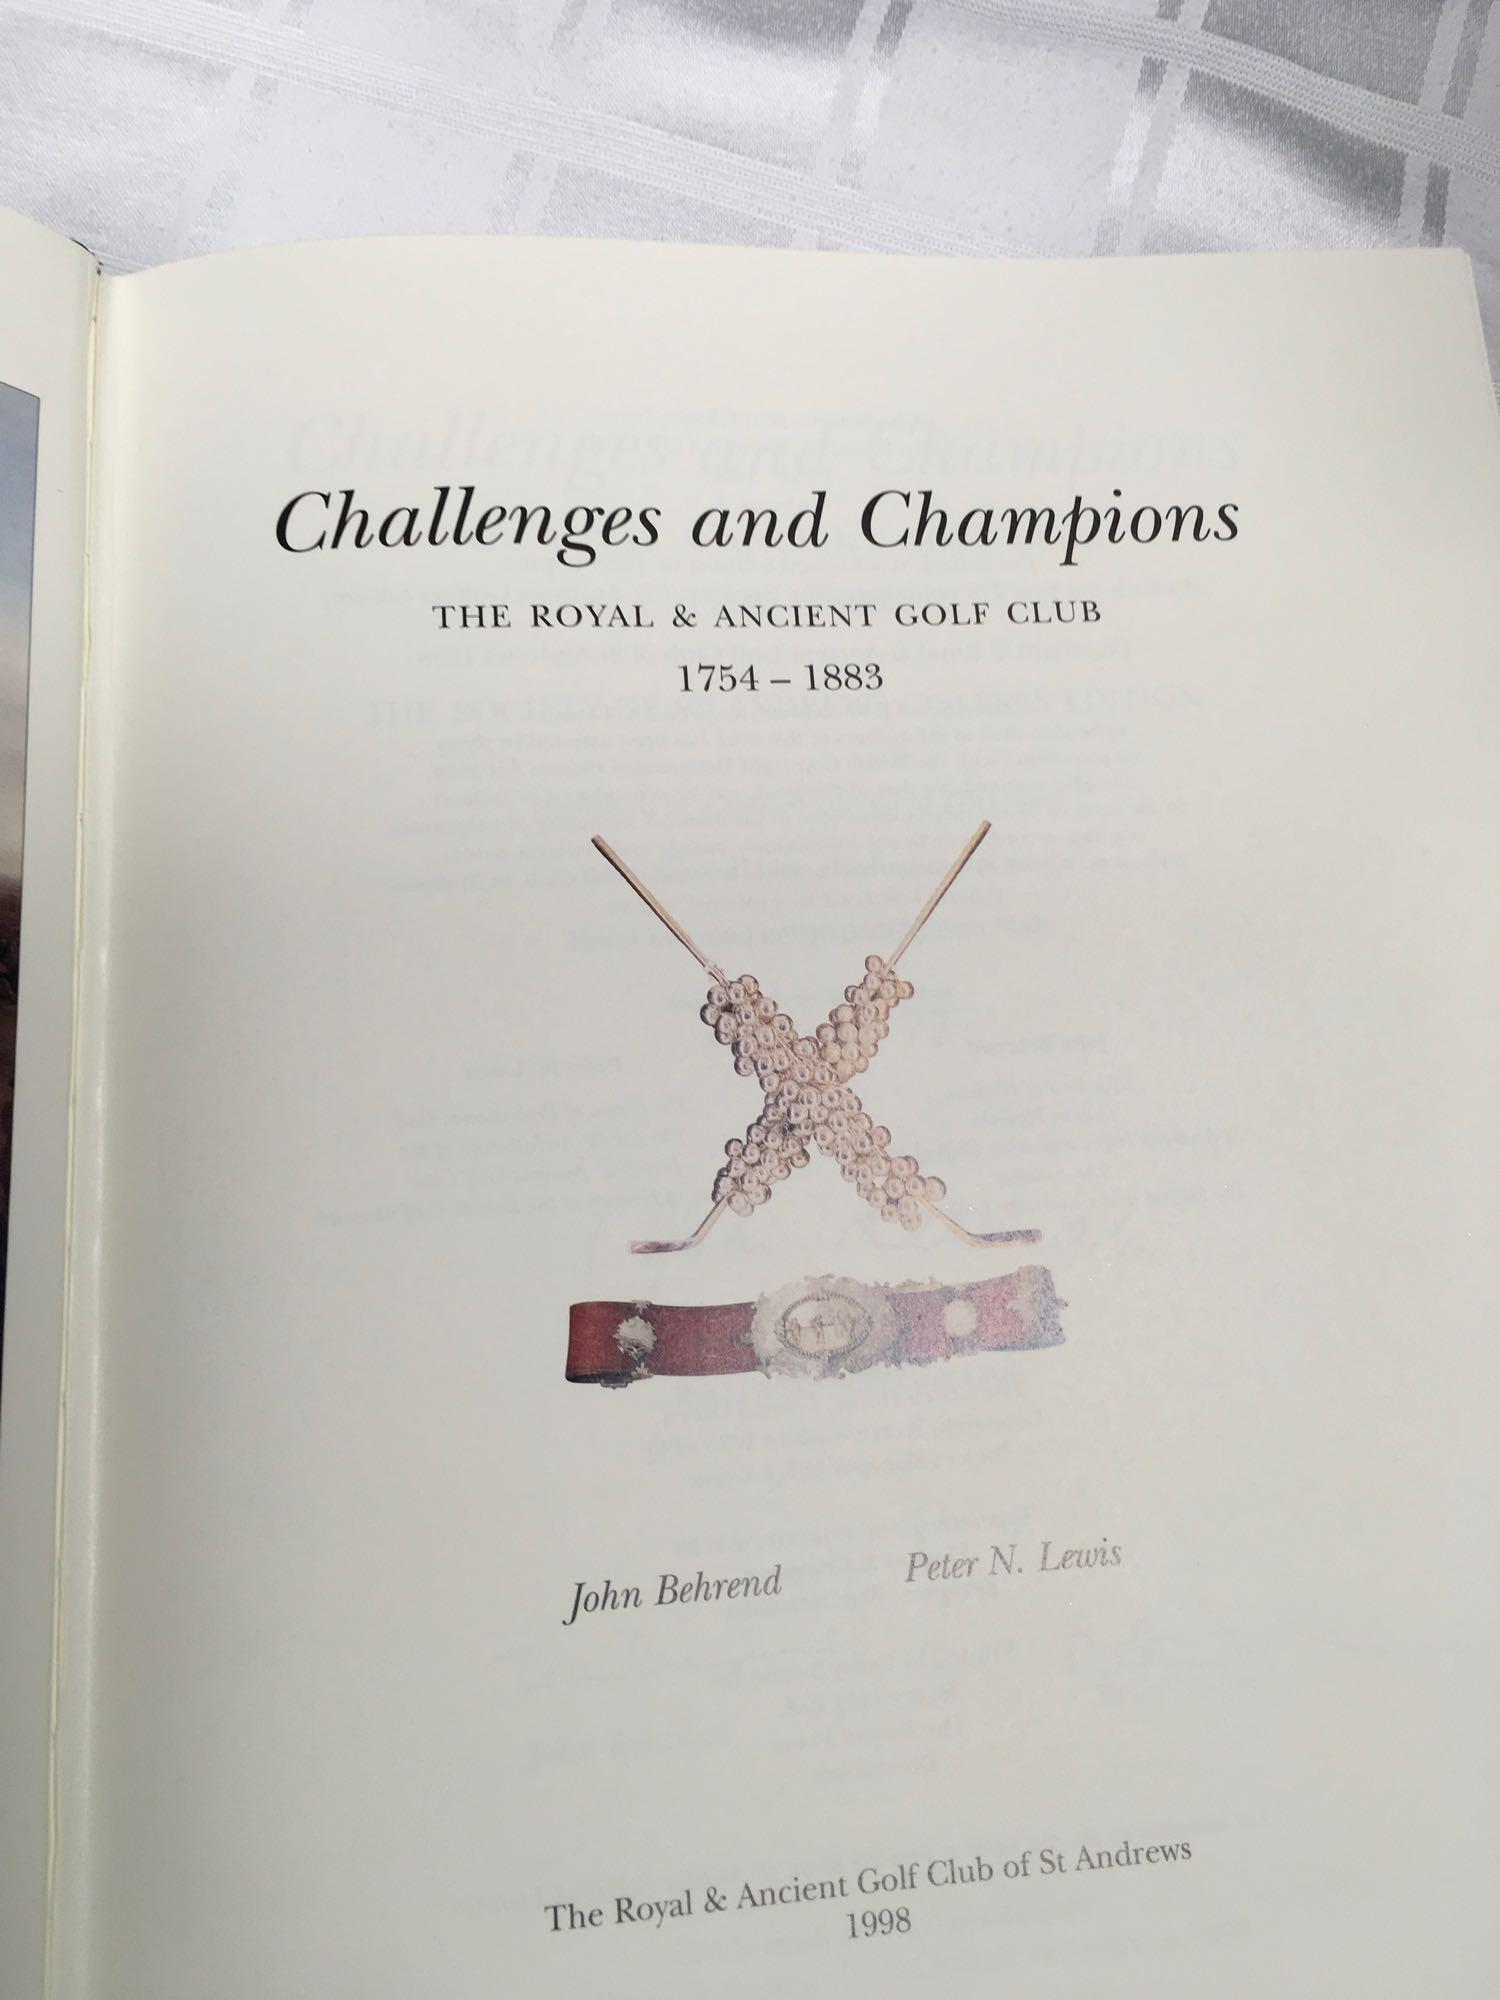 Royal & Ancient Golf Club Of St. Andrews "Traditions and Change" & "Challenges & Champions"